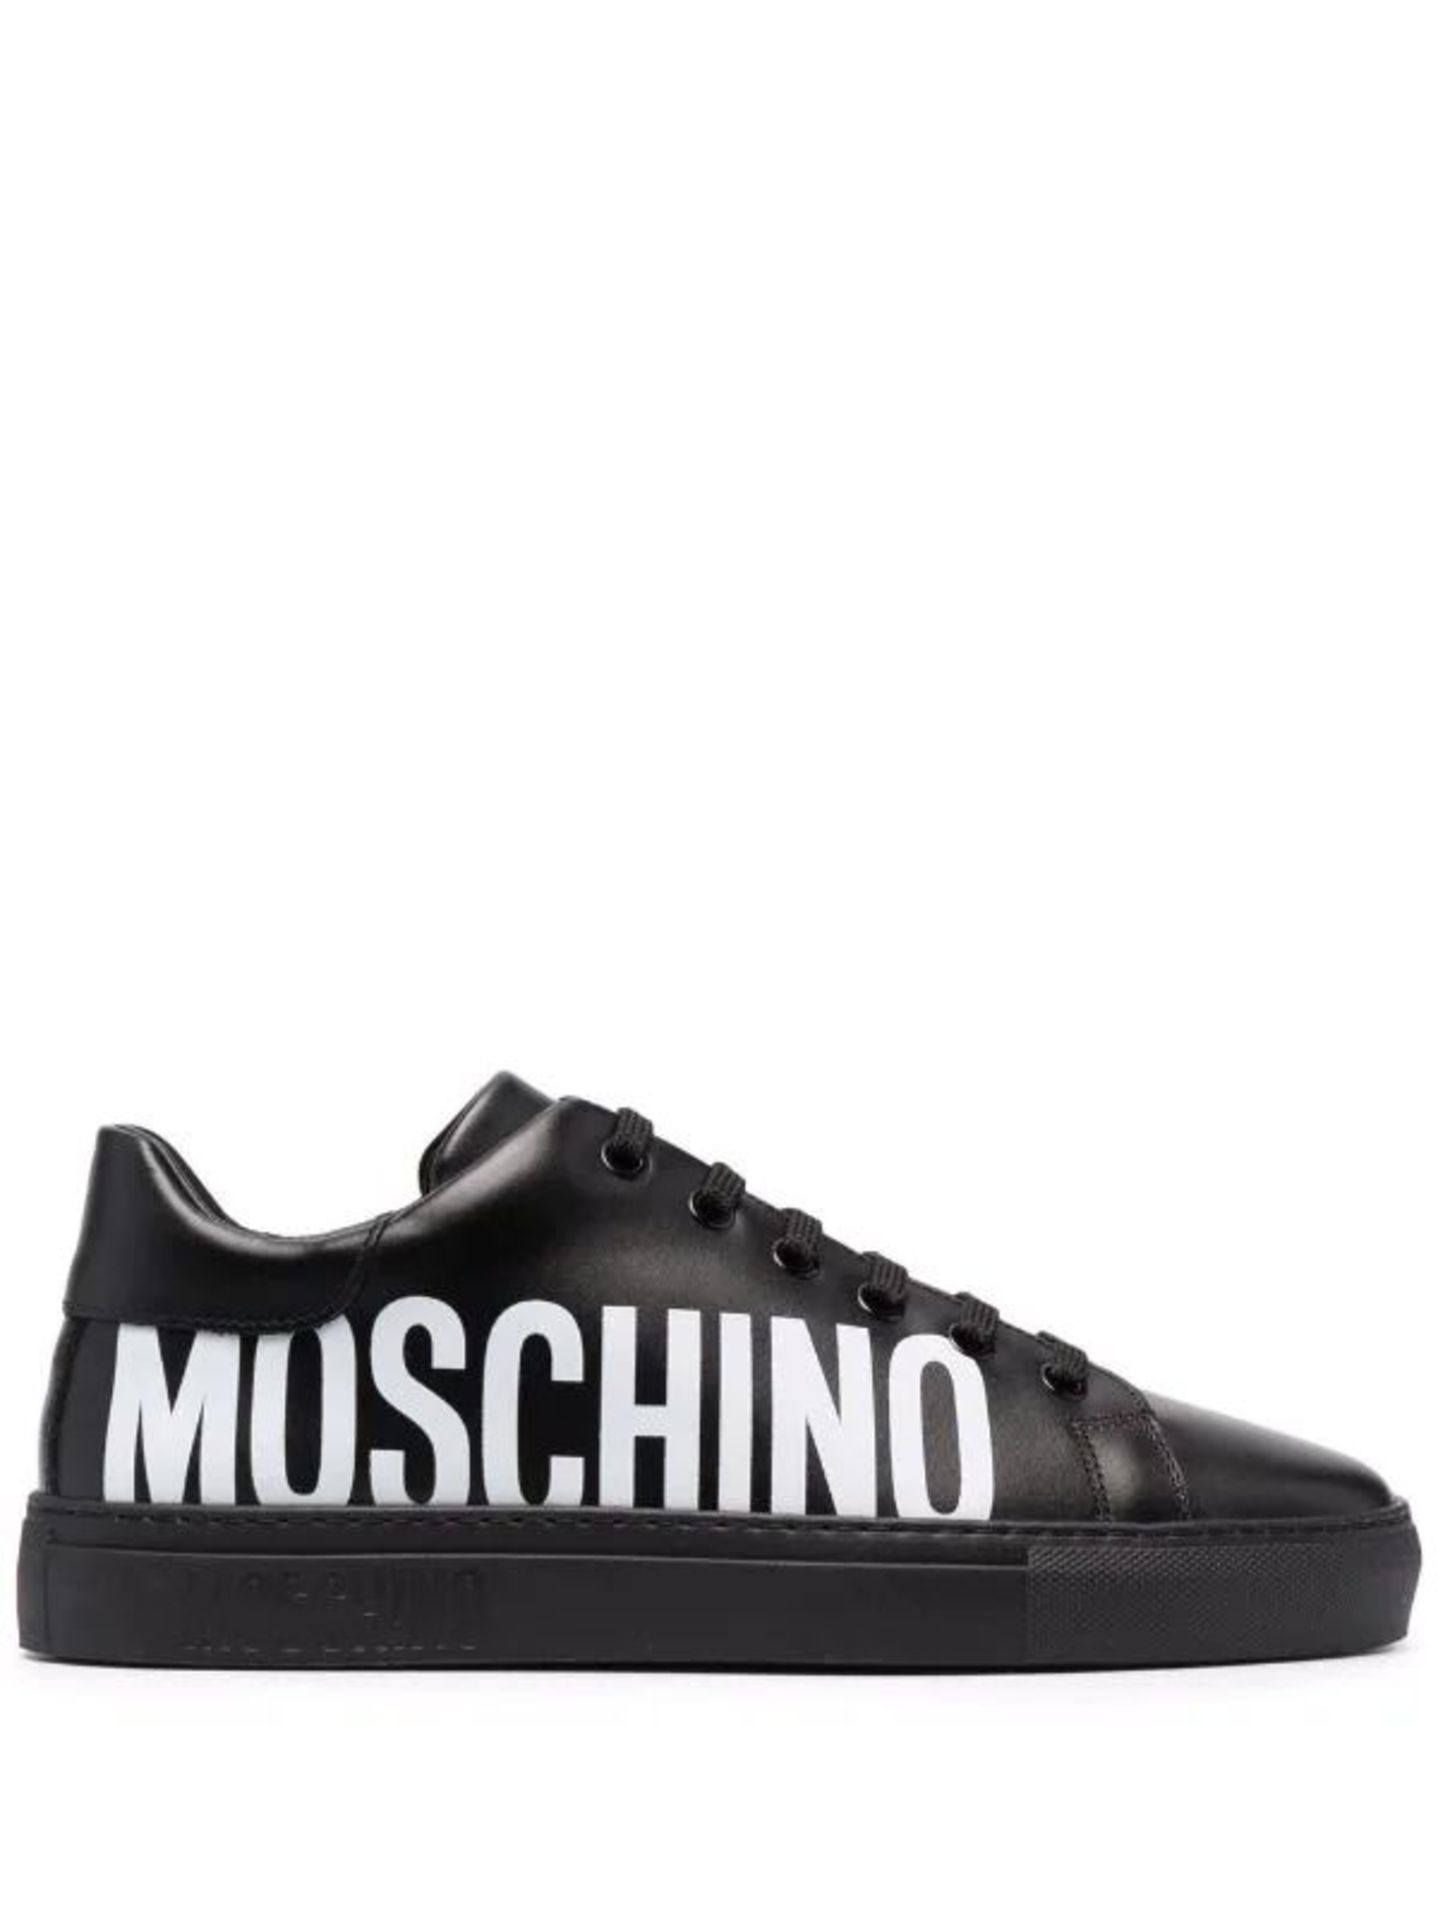 NEW & BOXED MOSCHINO Logo-Printed Lace-Up Sneaker. BLACK. SIZE 43. RRP £215. (OFC).